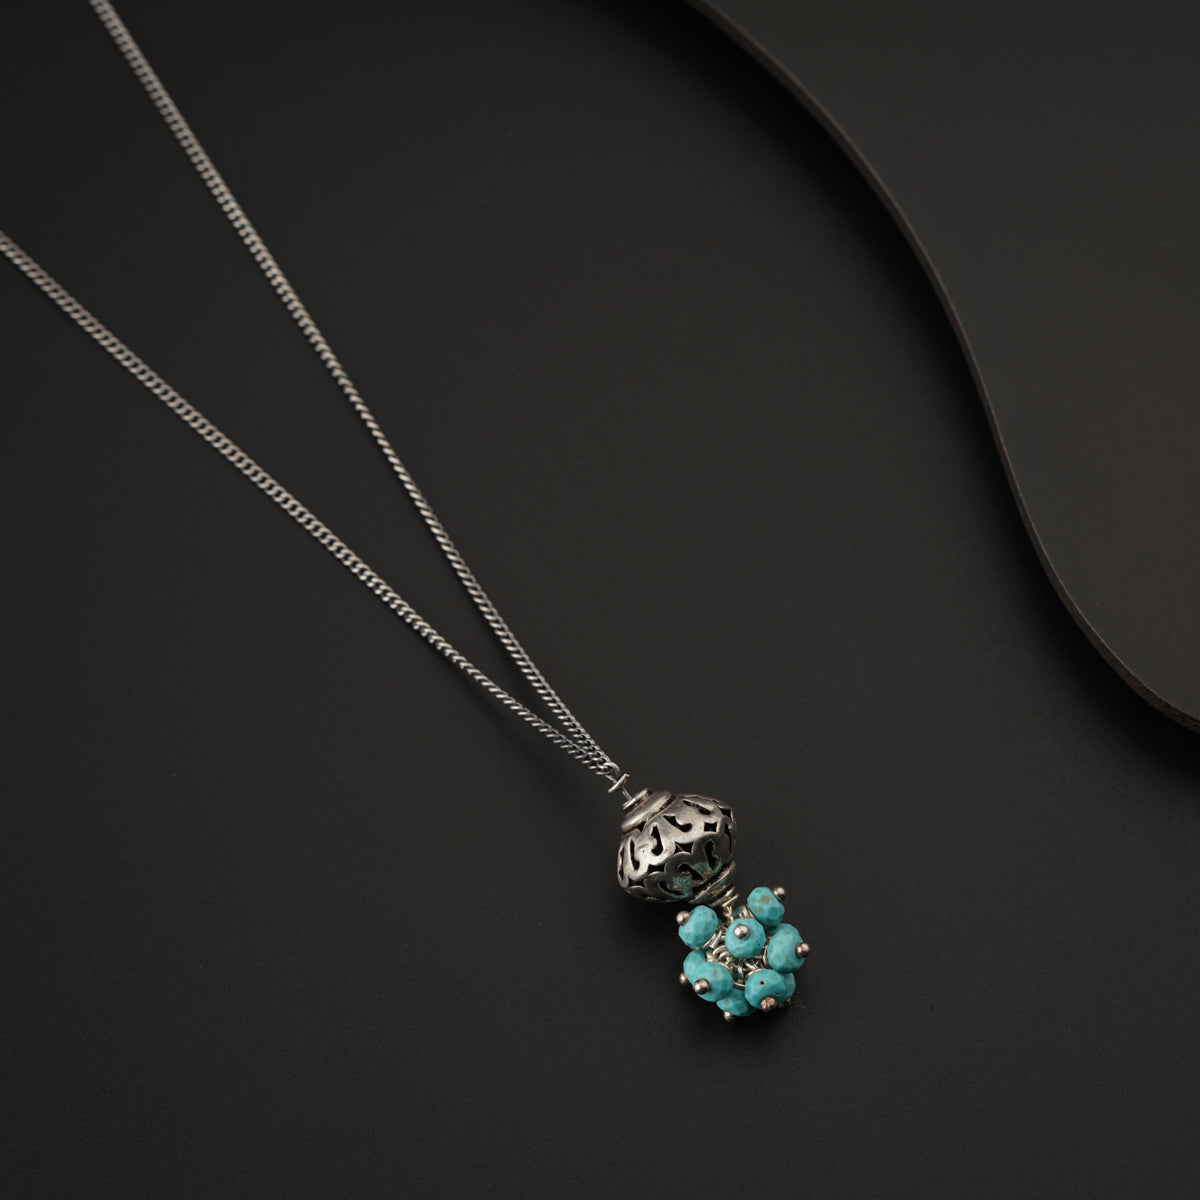 Oxidized Silver Filigree Necklace with Turquoise